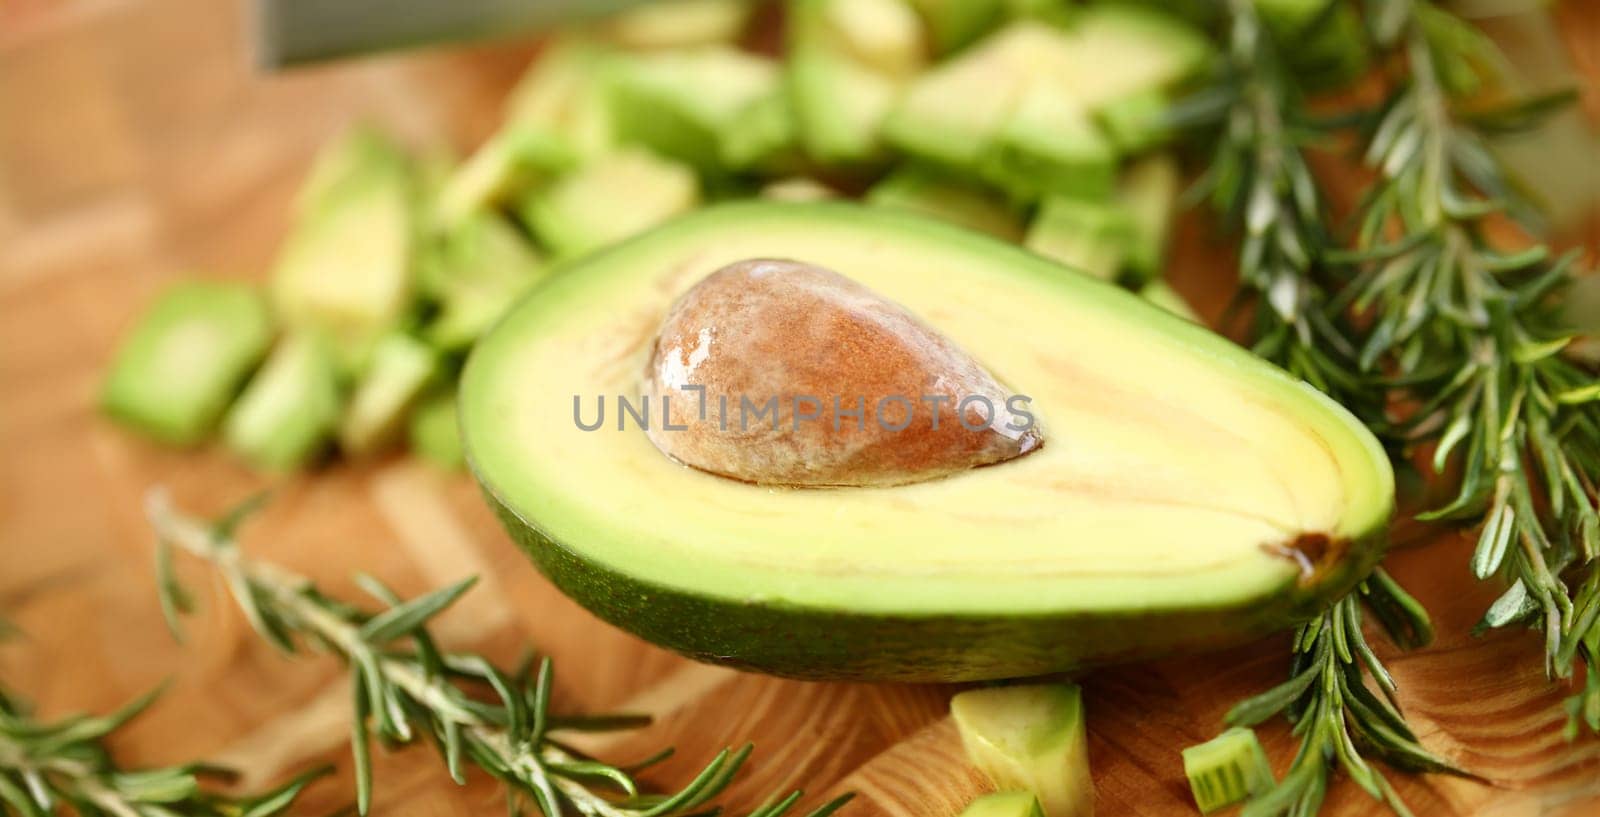 Tropical Avocado Fruit Half Holding Brown Seed. Exotic Ingredient on Wooden Cutting Board. Dieting and Healthy Food with Rosemary Herb. Tasty Appetizer. Partial View Horizontal Photography